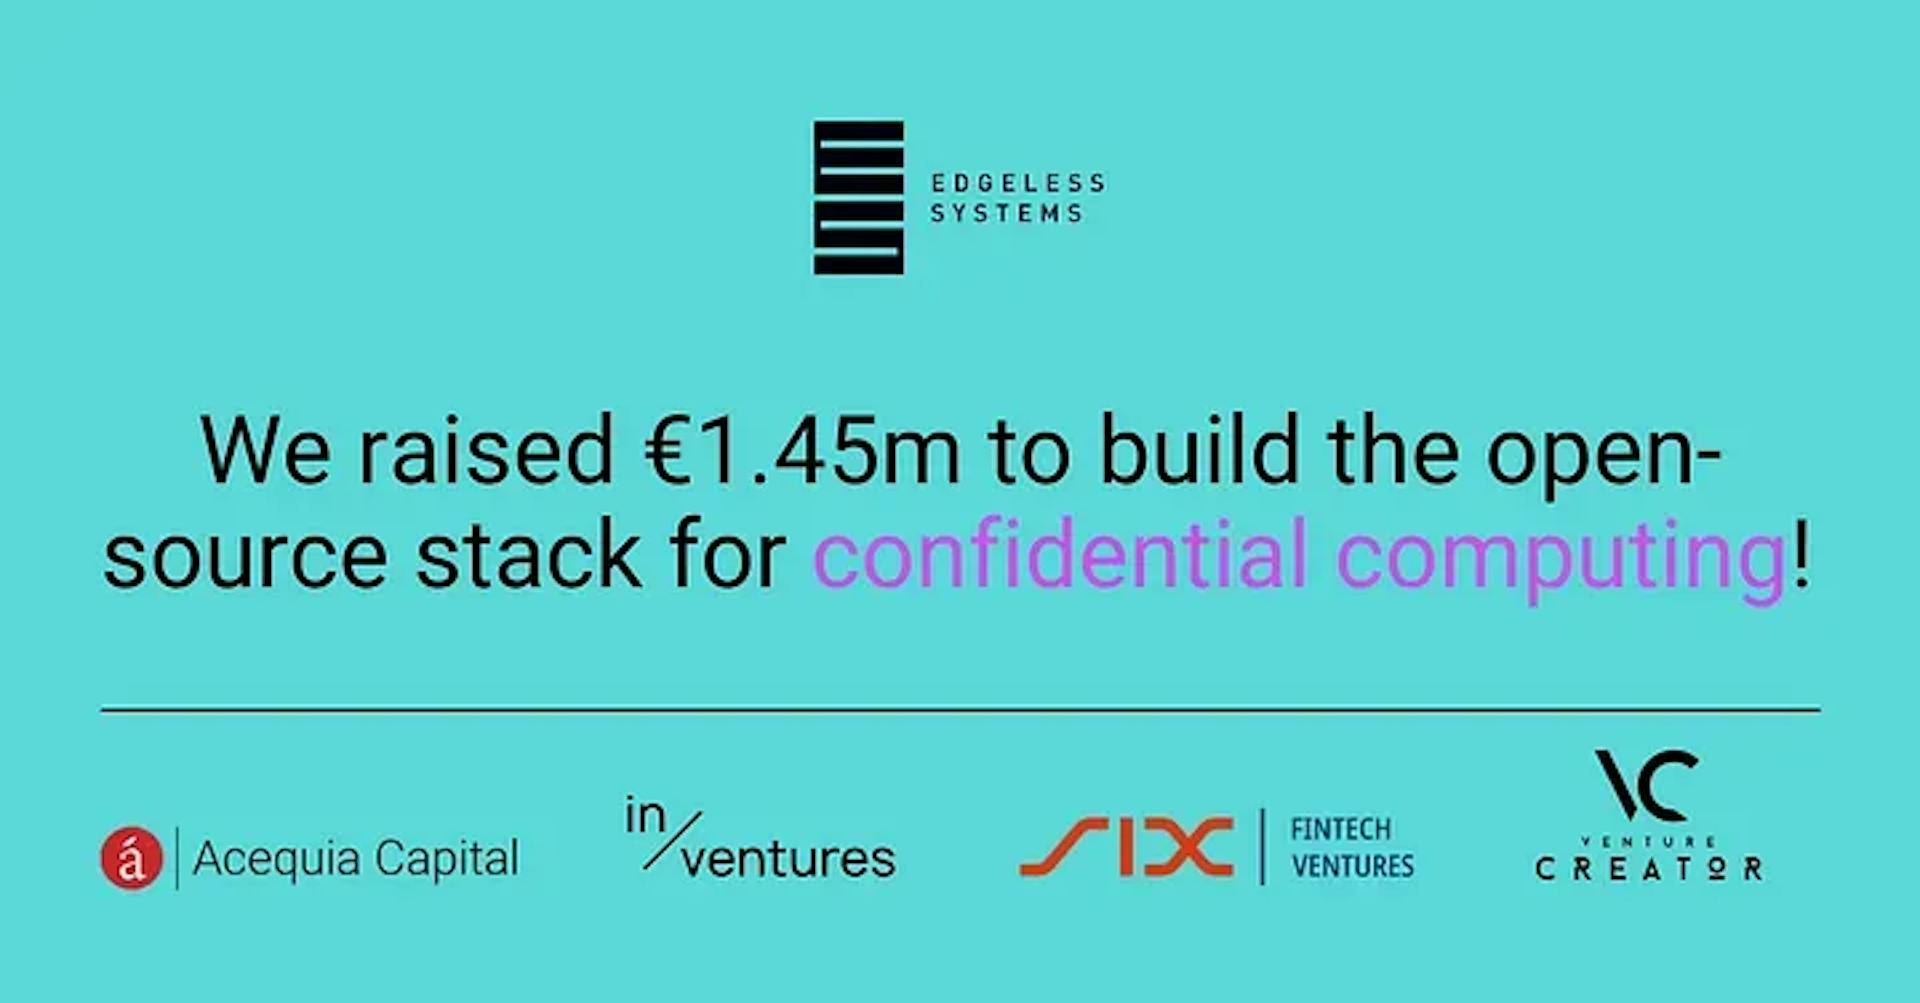 We raised €1.45m to build the open-source stack for confidential computing!